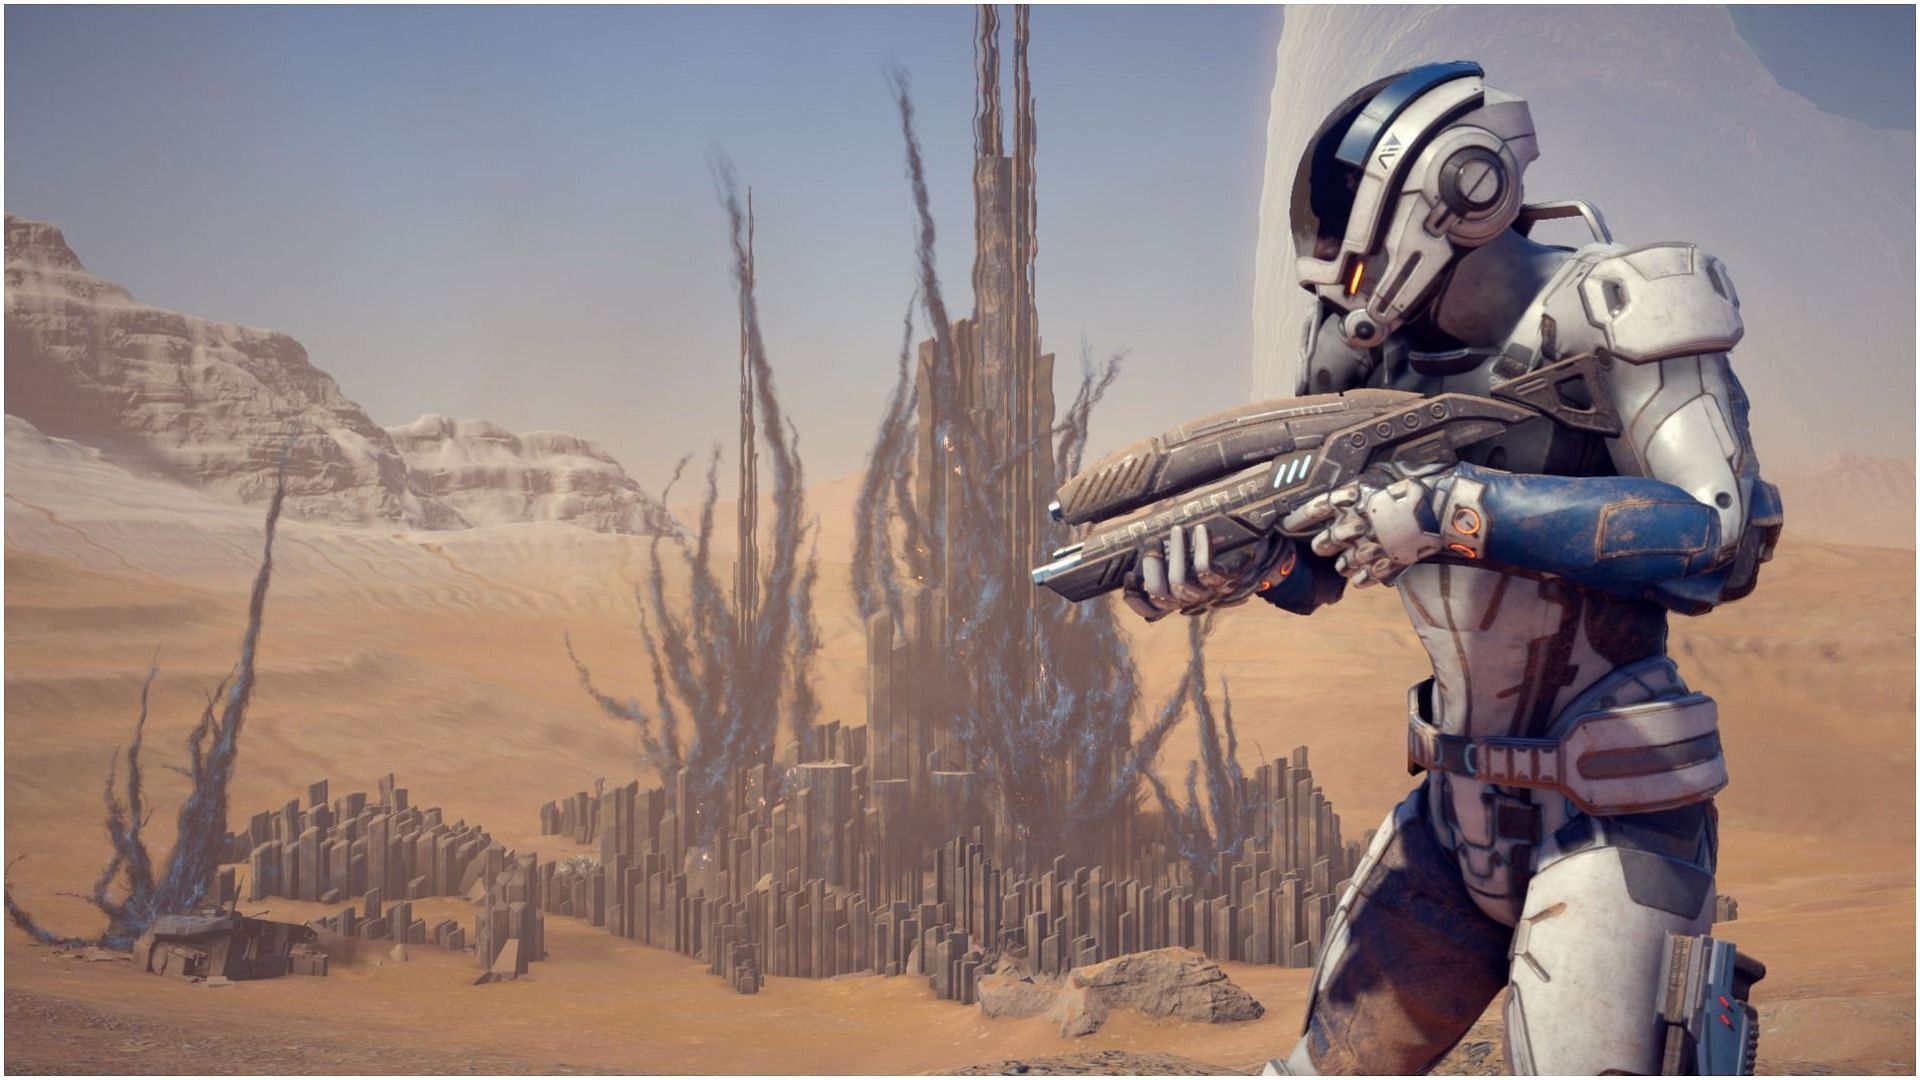 Players can explore the world of Mass Effect: Andromeda (image via BioWare)